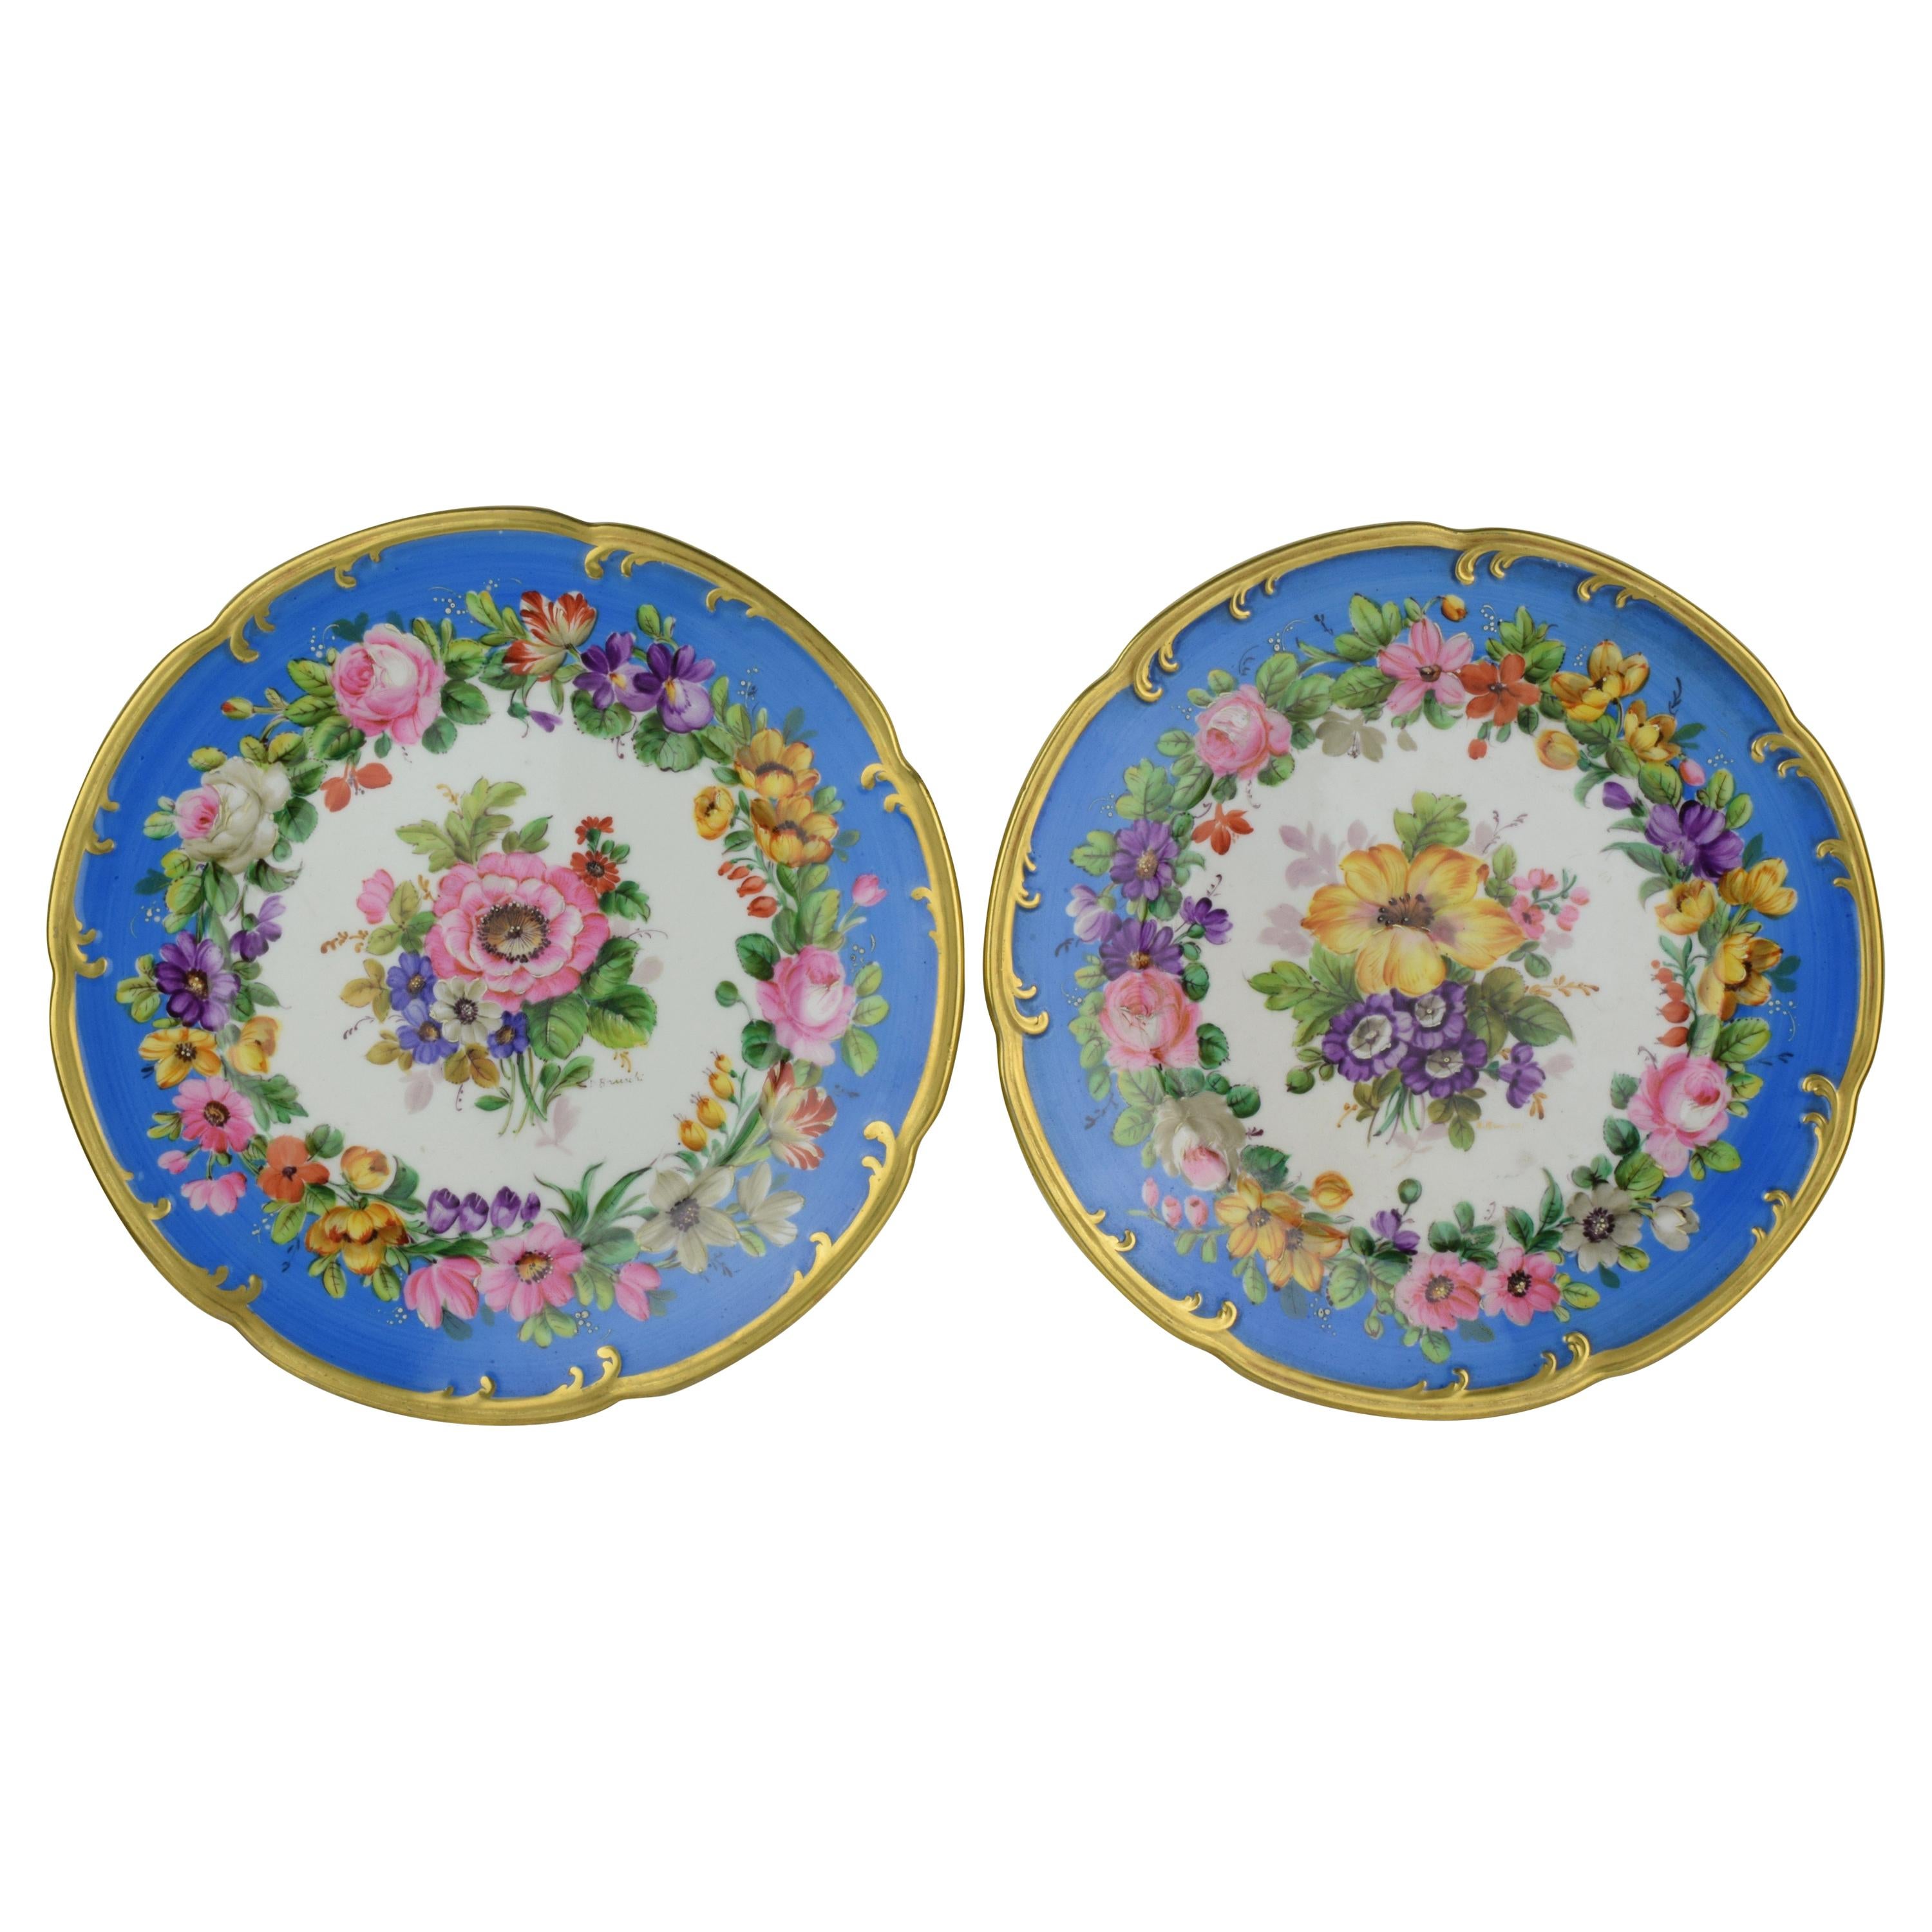 Pair of Italian Porcelain Plates with Flowers on a White and Blue Background